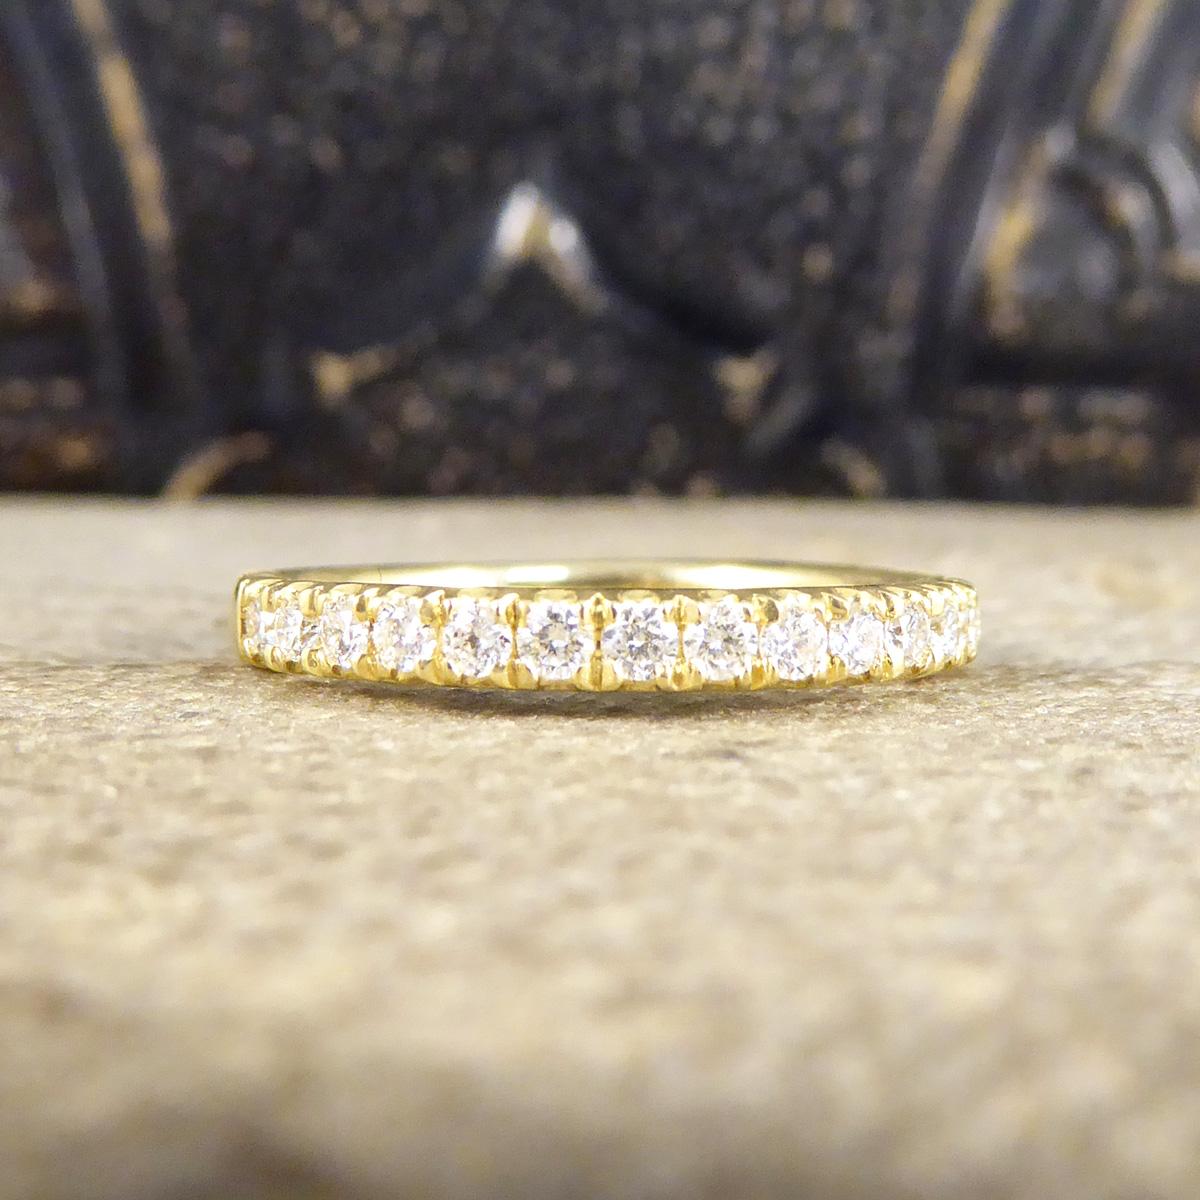 The perfect ring for any Yellow Gold lover to stack, wear independently, as a wedding or eternity band. It features 17 clean and bright Brilliant Cut Diamonds weighing a total of 0.35ct it sparkles from every angle on the top of the finger with the